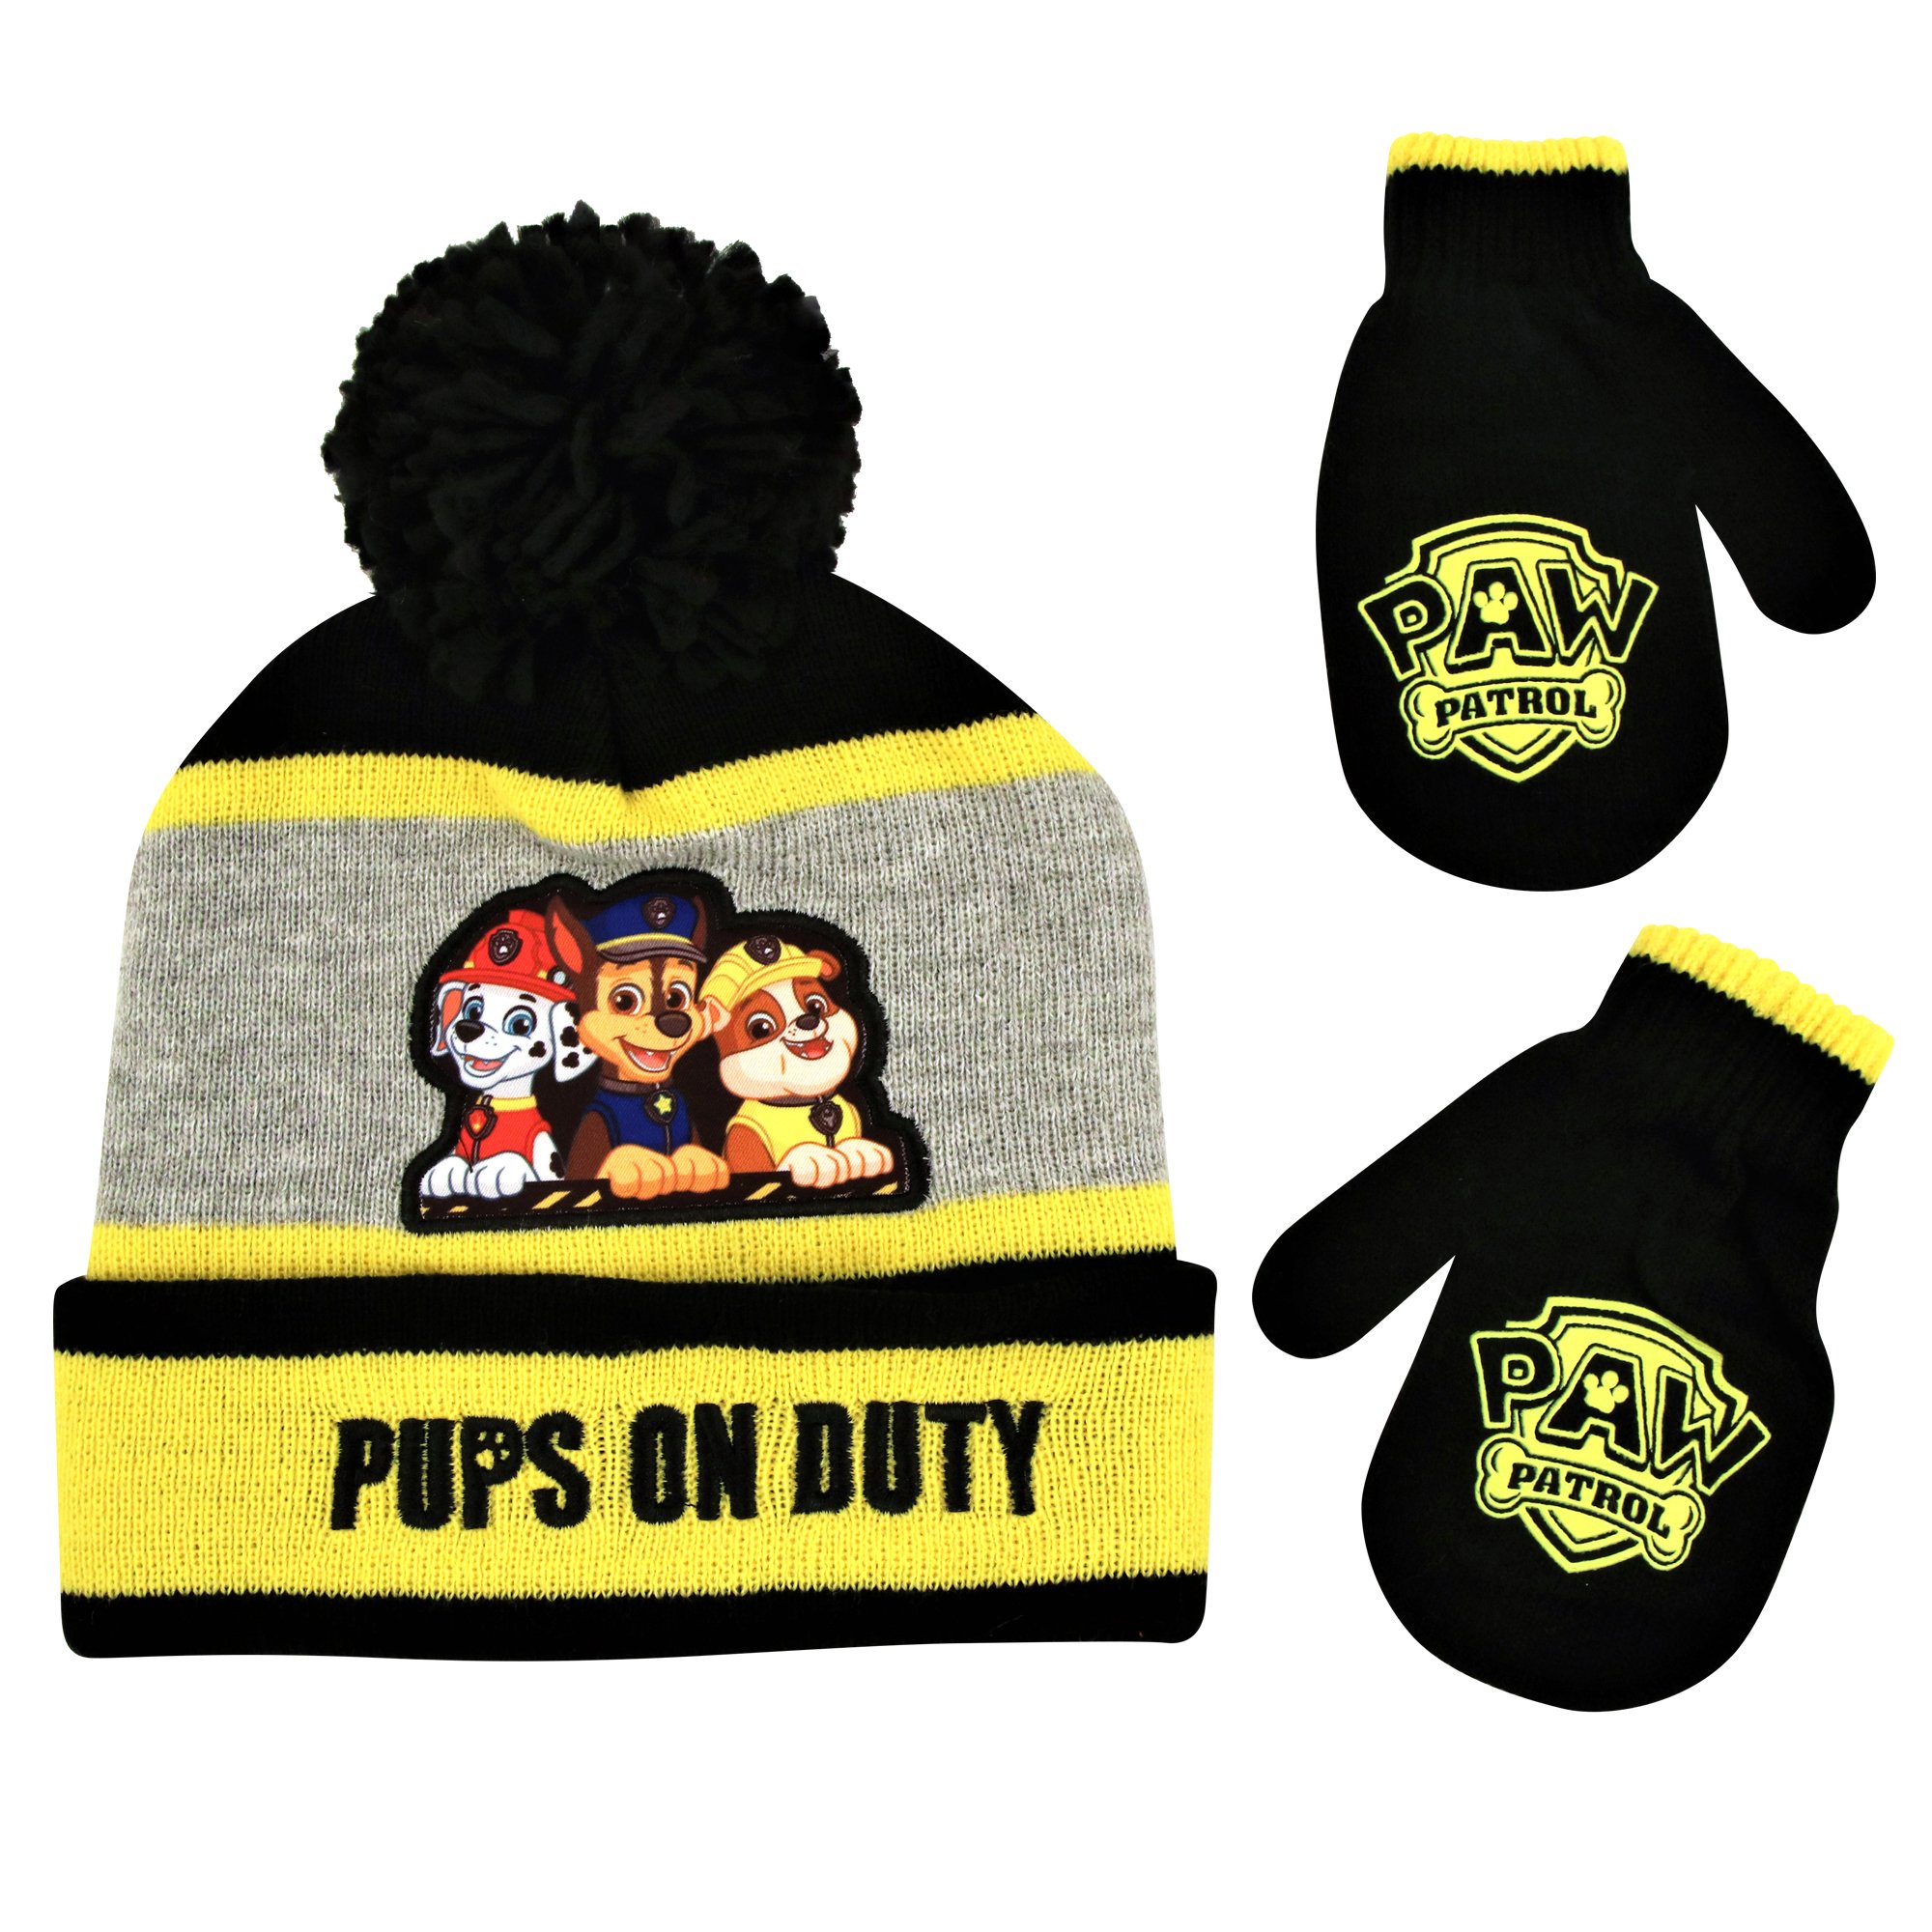 Nickelodeon Paw Patrol Hat and Glove Set New with Tag 